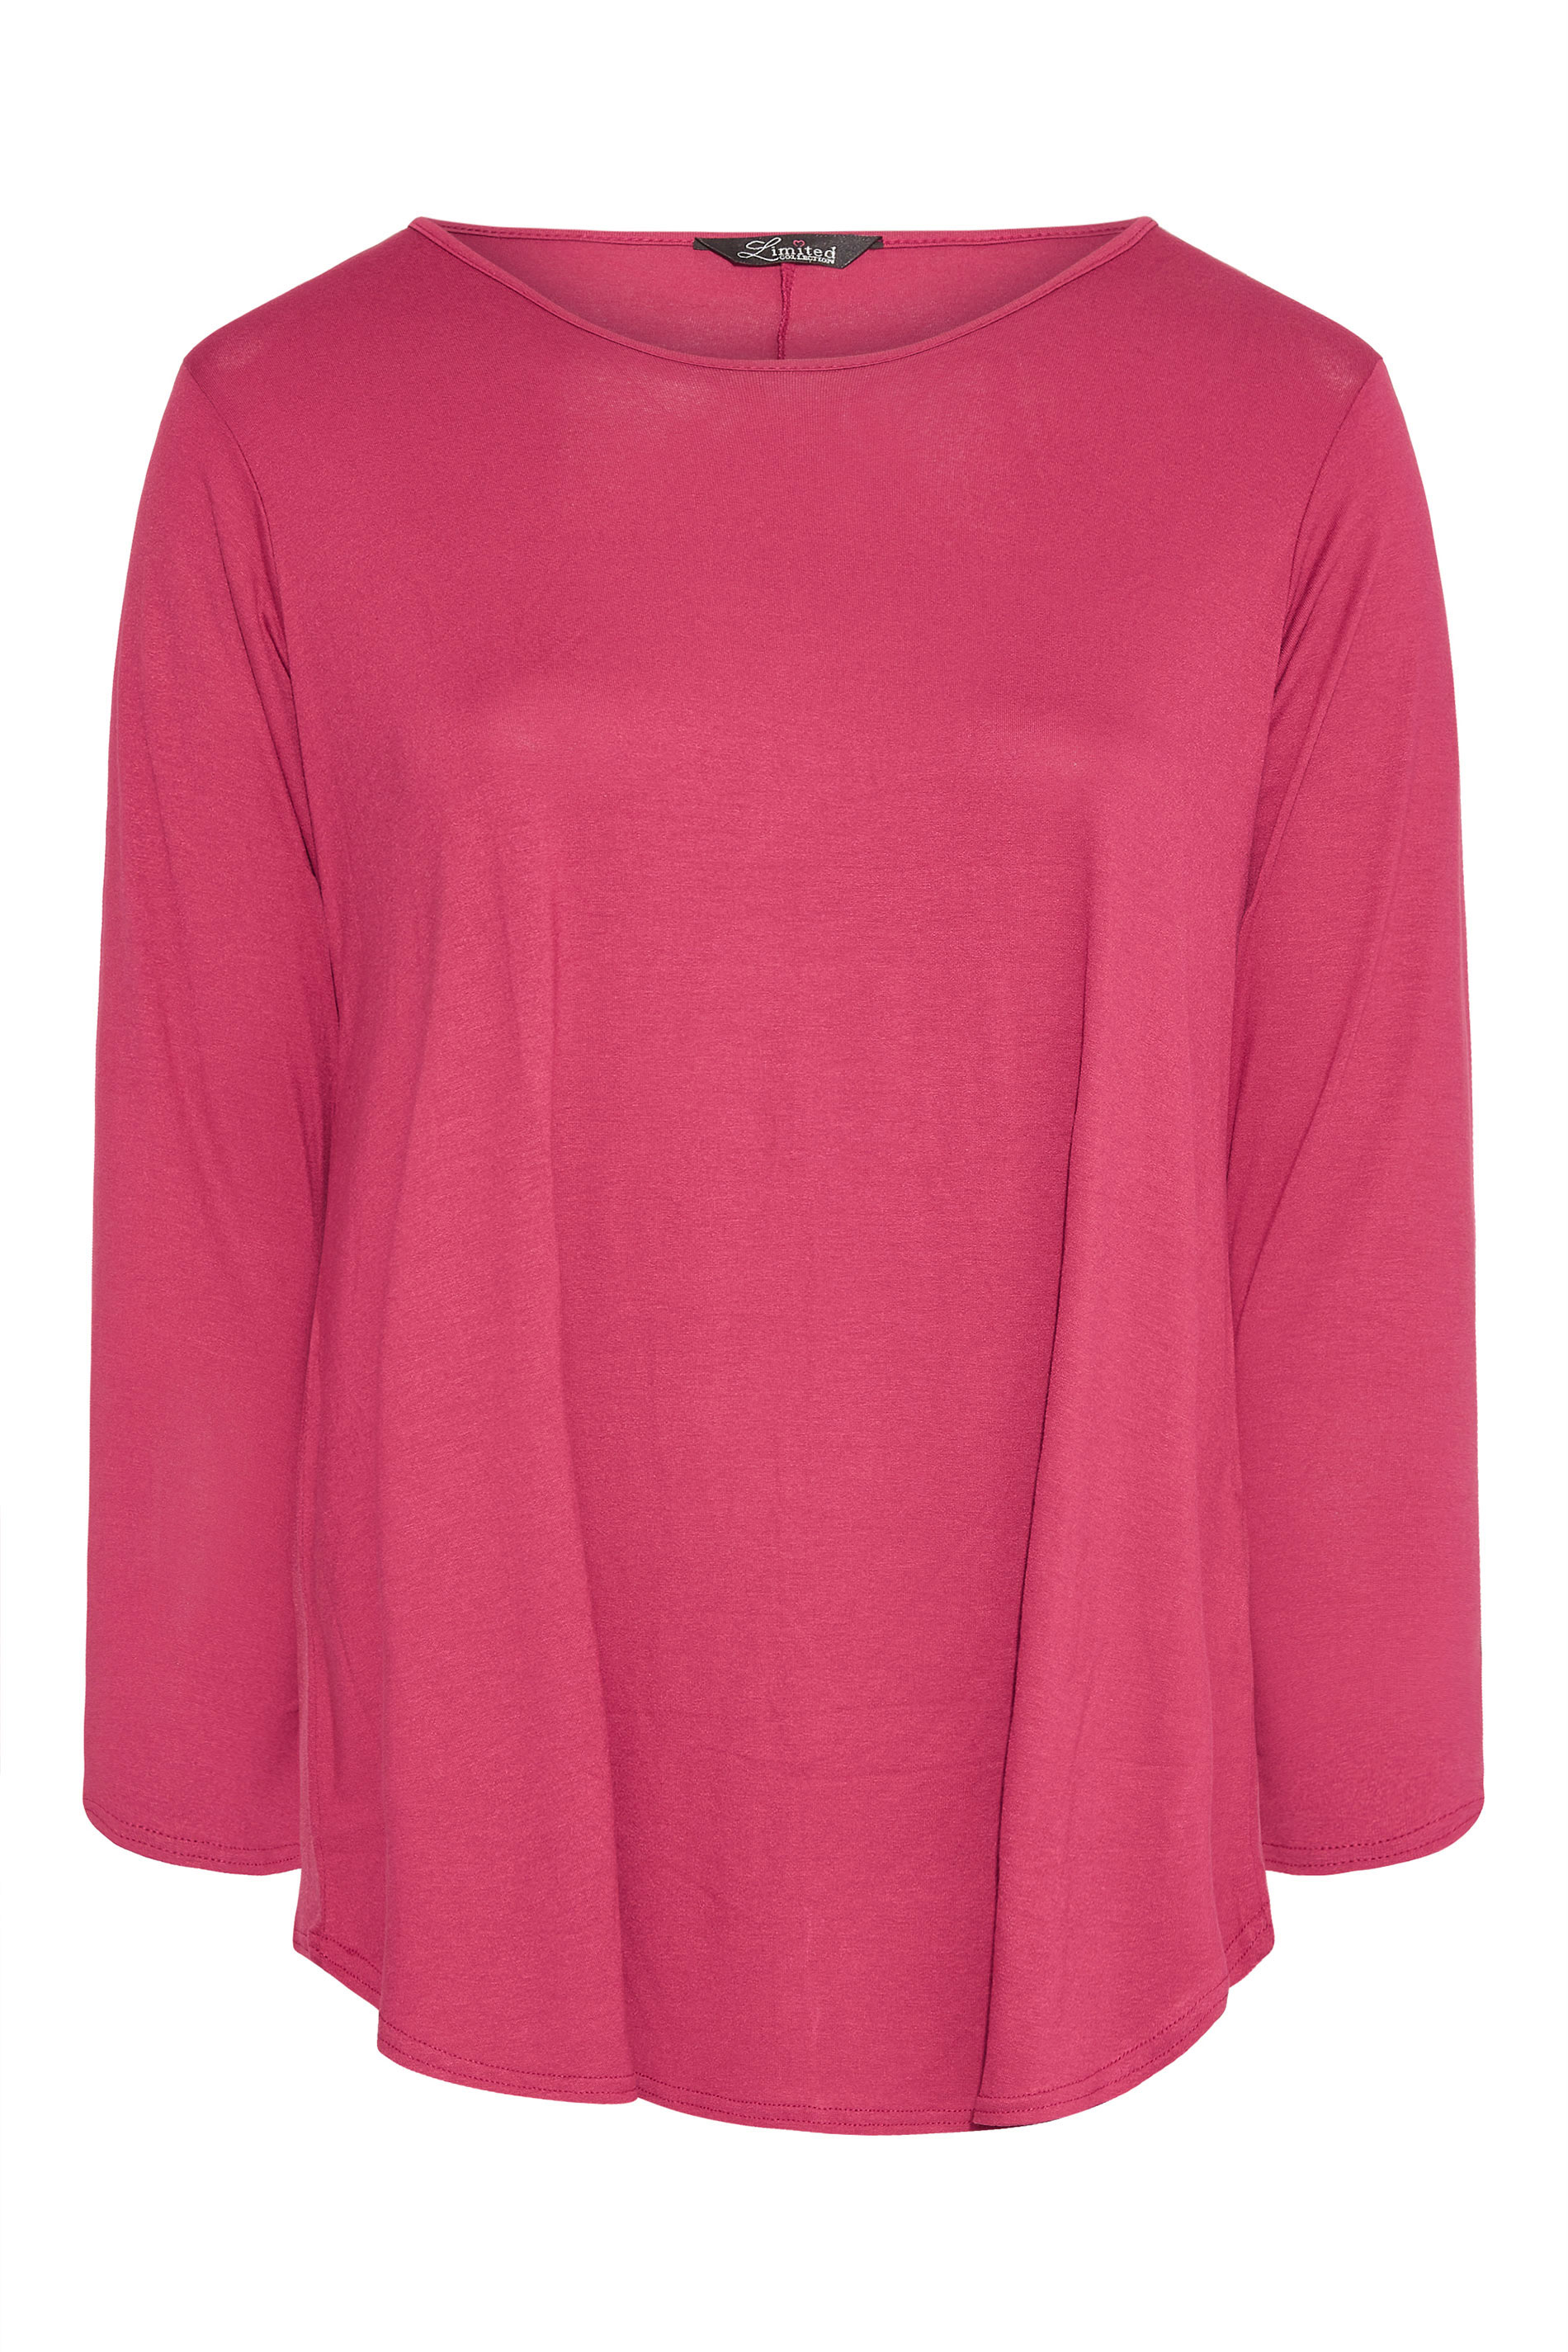 LIMITED COLLECTION Pink Long Sleeve Swing Top_F.jpg